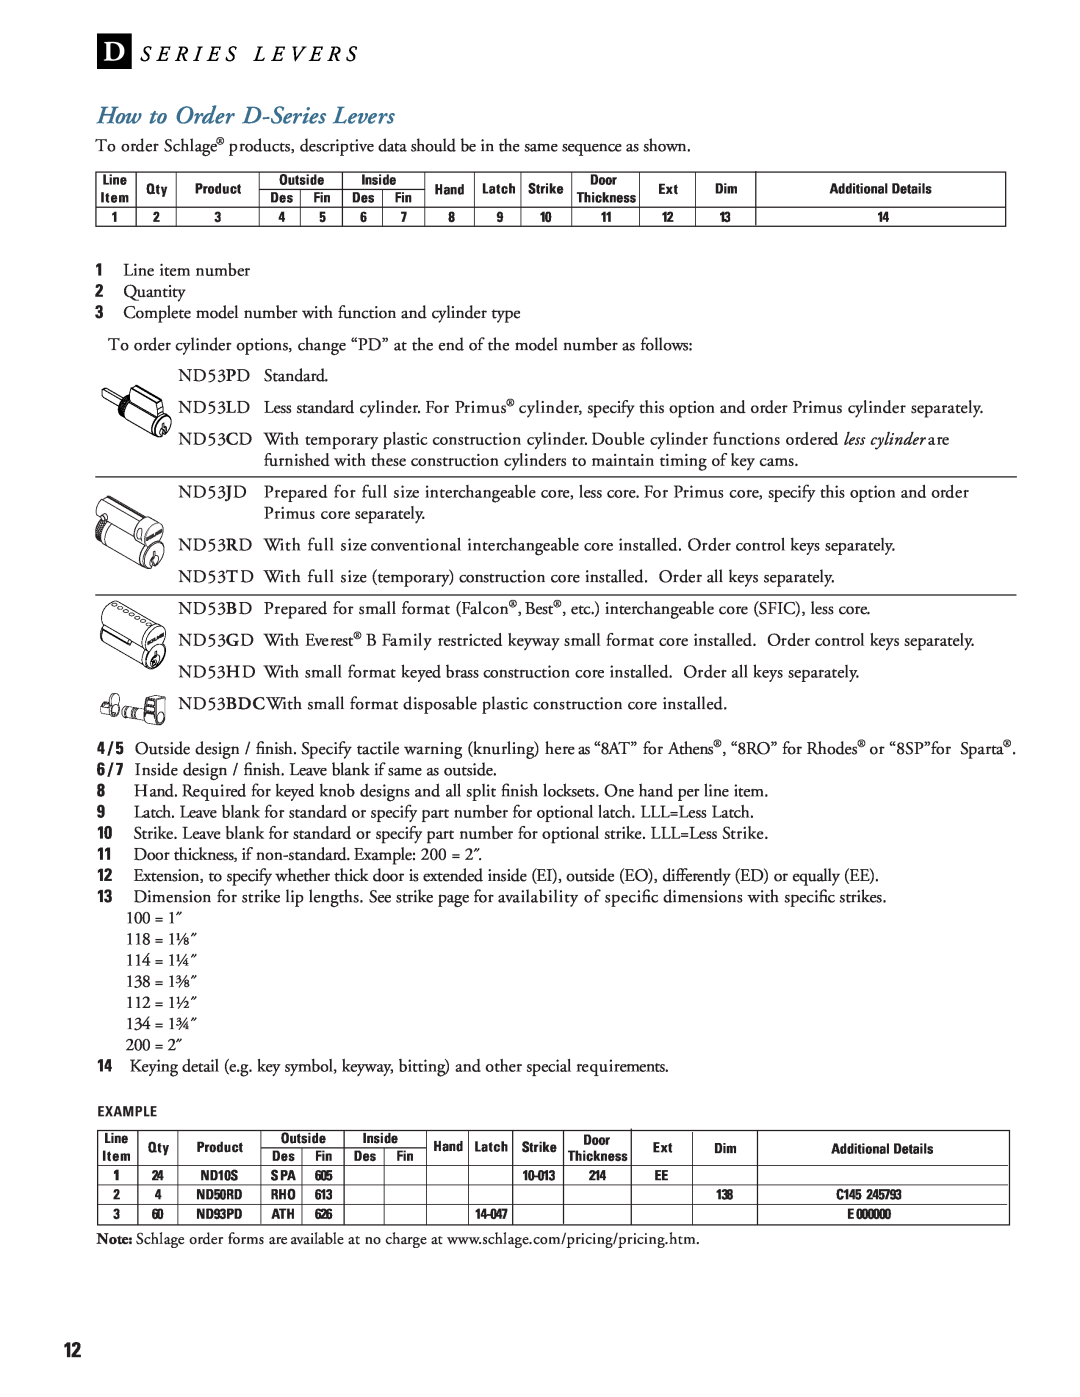 Schlage manual How to Order D-SeriesLevers 